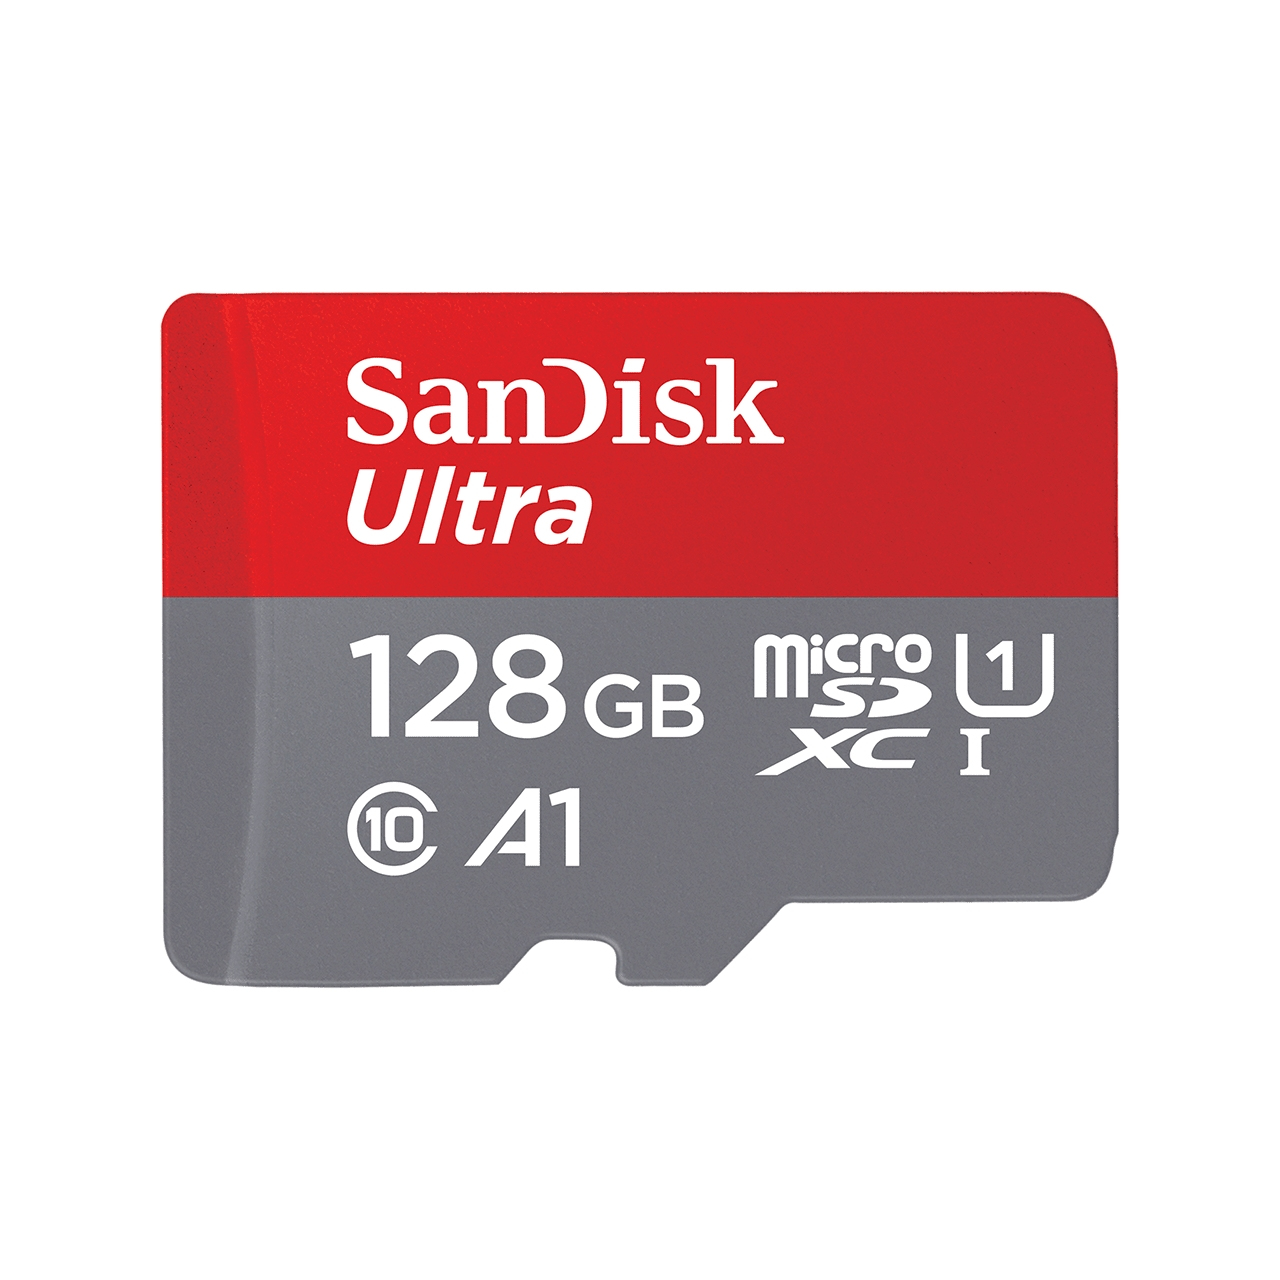 SanDisk MicroSDXC Ultra Android 128GB 120MB/s Class 10 A1